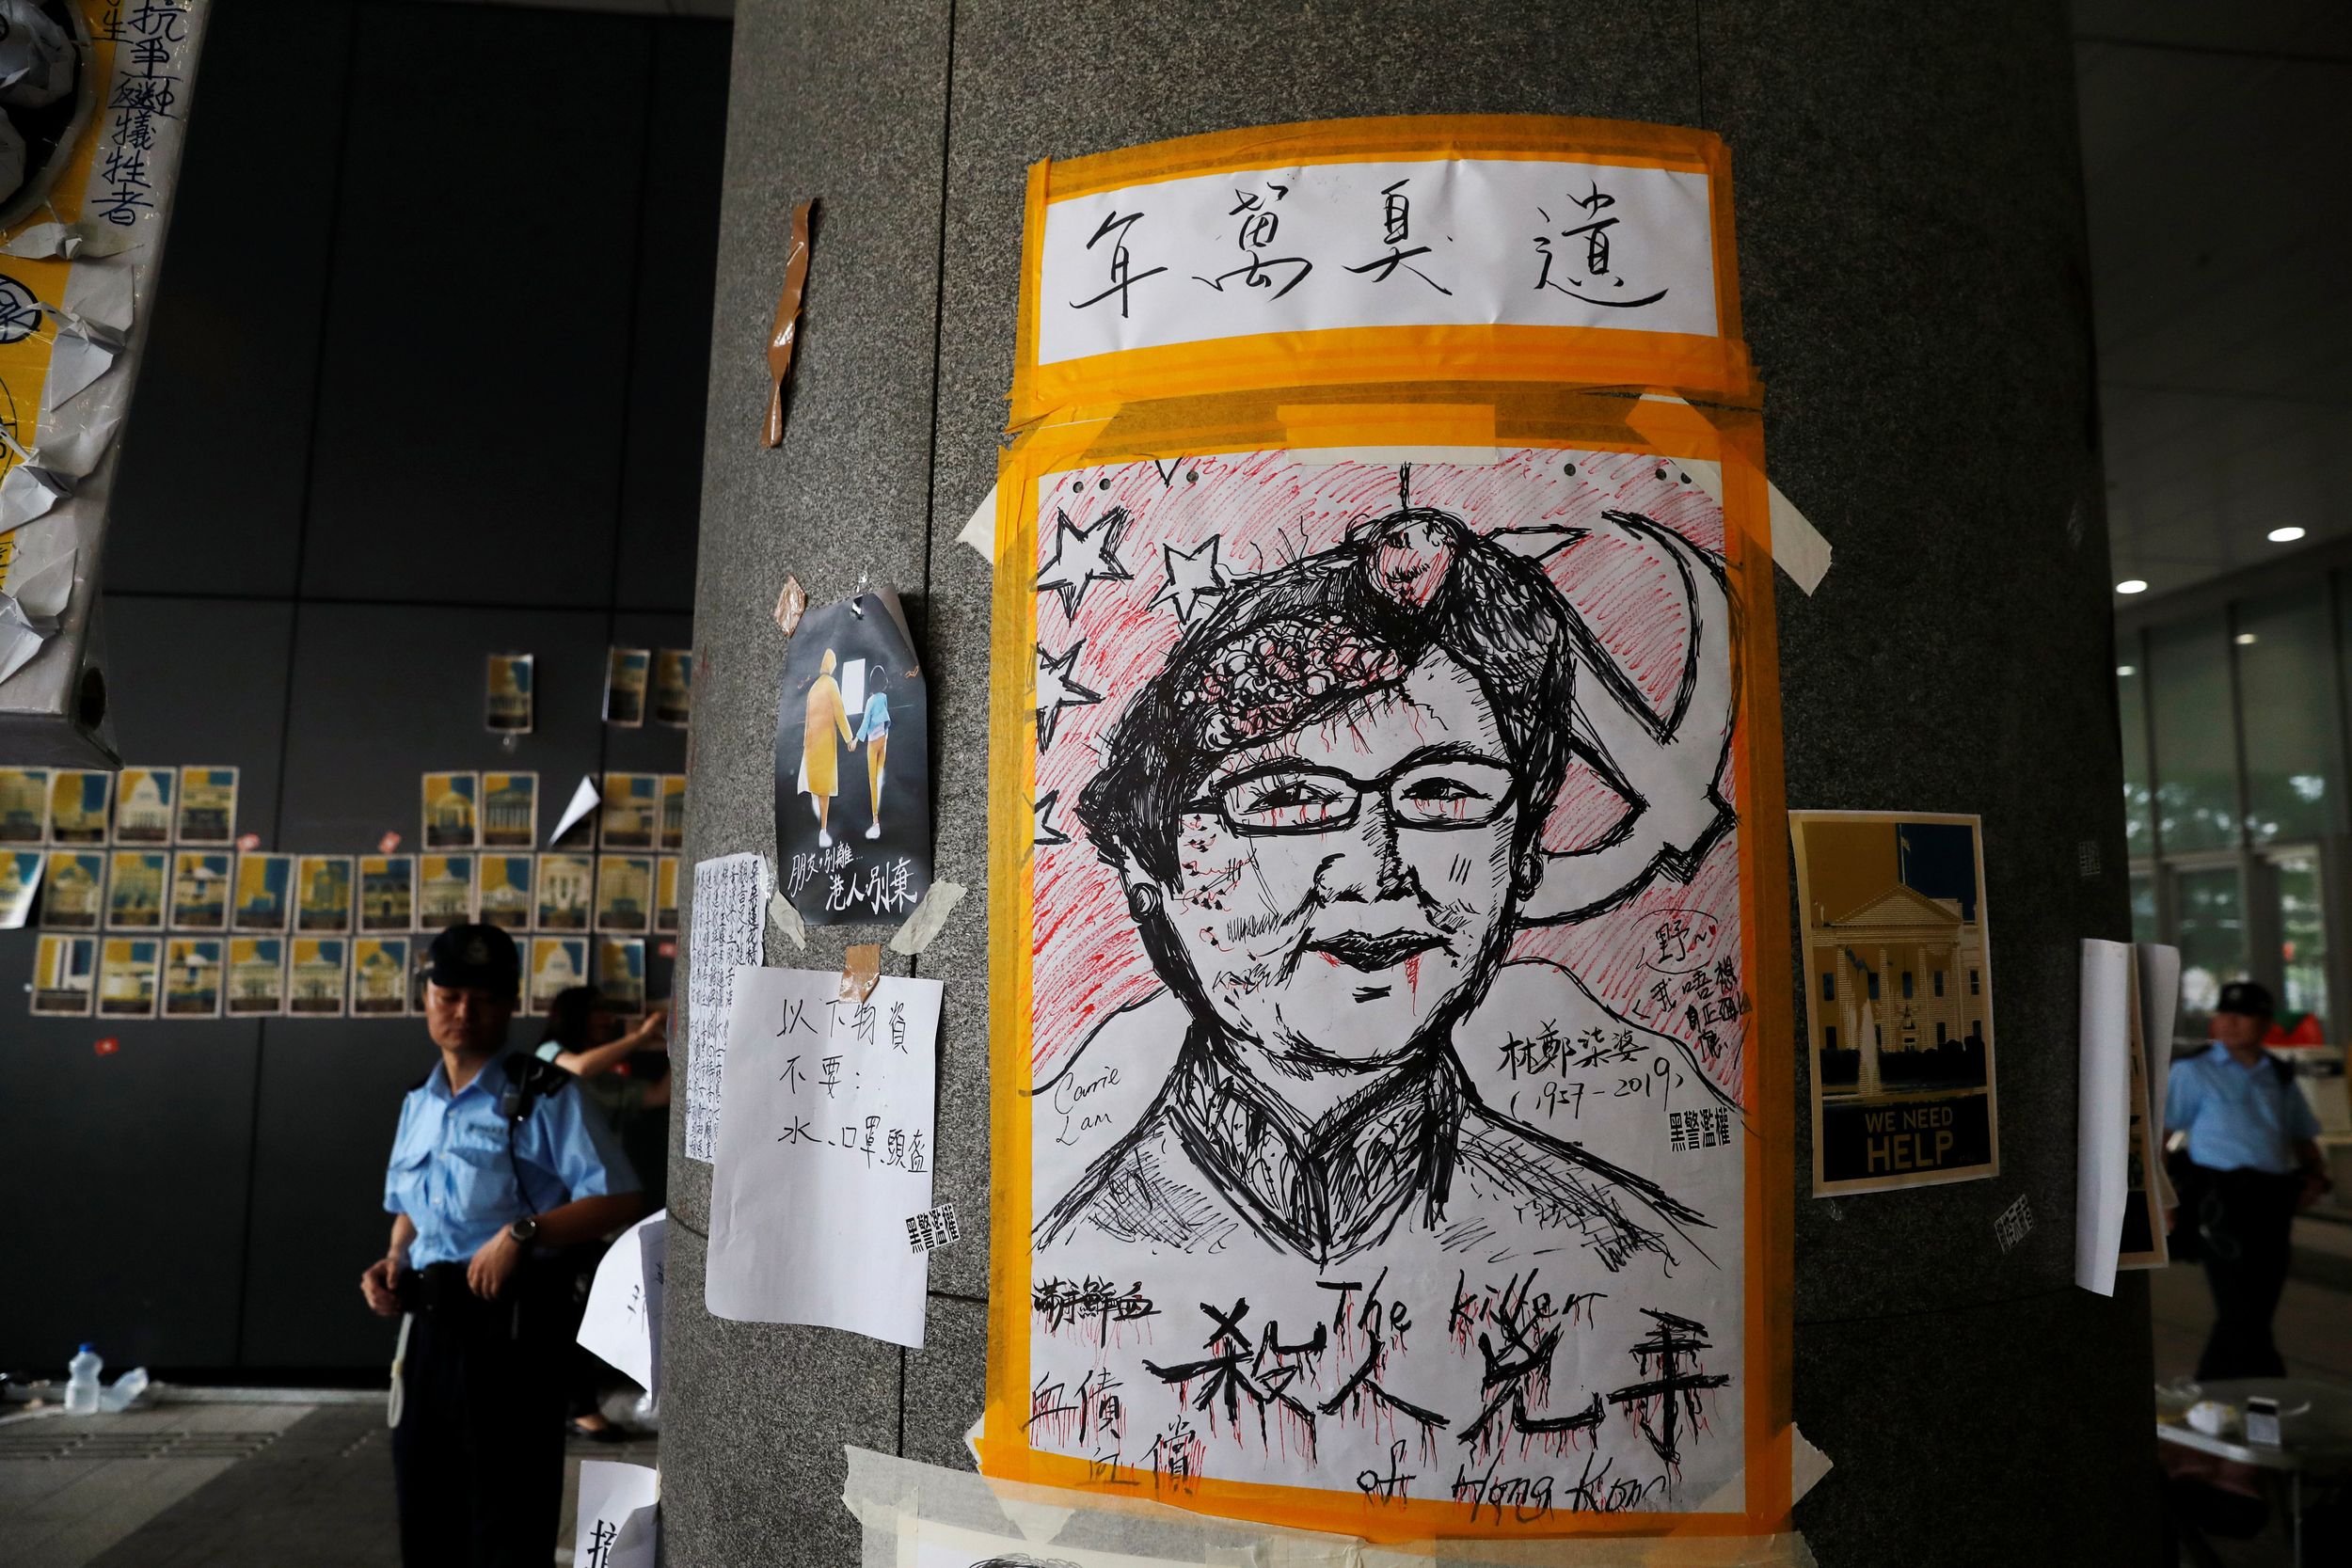 What we are watching: What Does “Dead” Mean in Hong Kong?